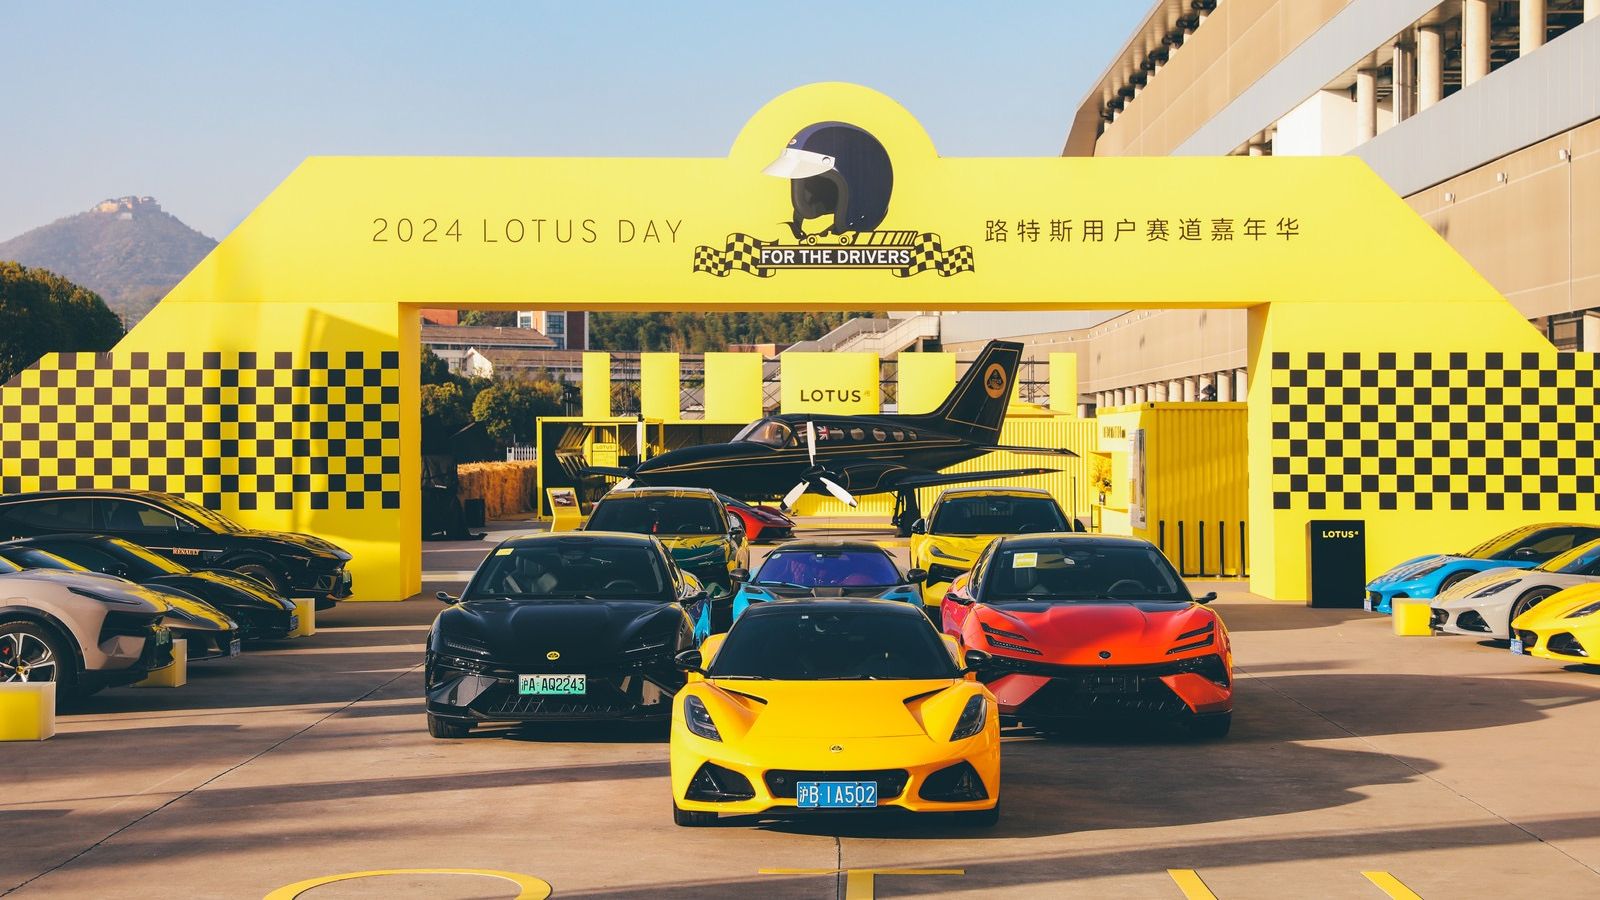 LOTUS DAY 2024: Racing, Innovation and Passion